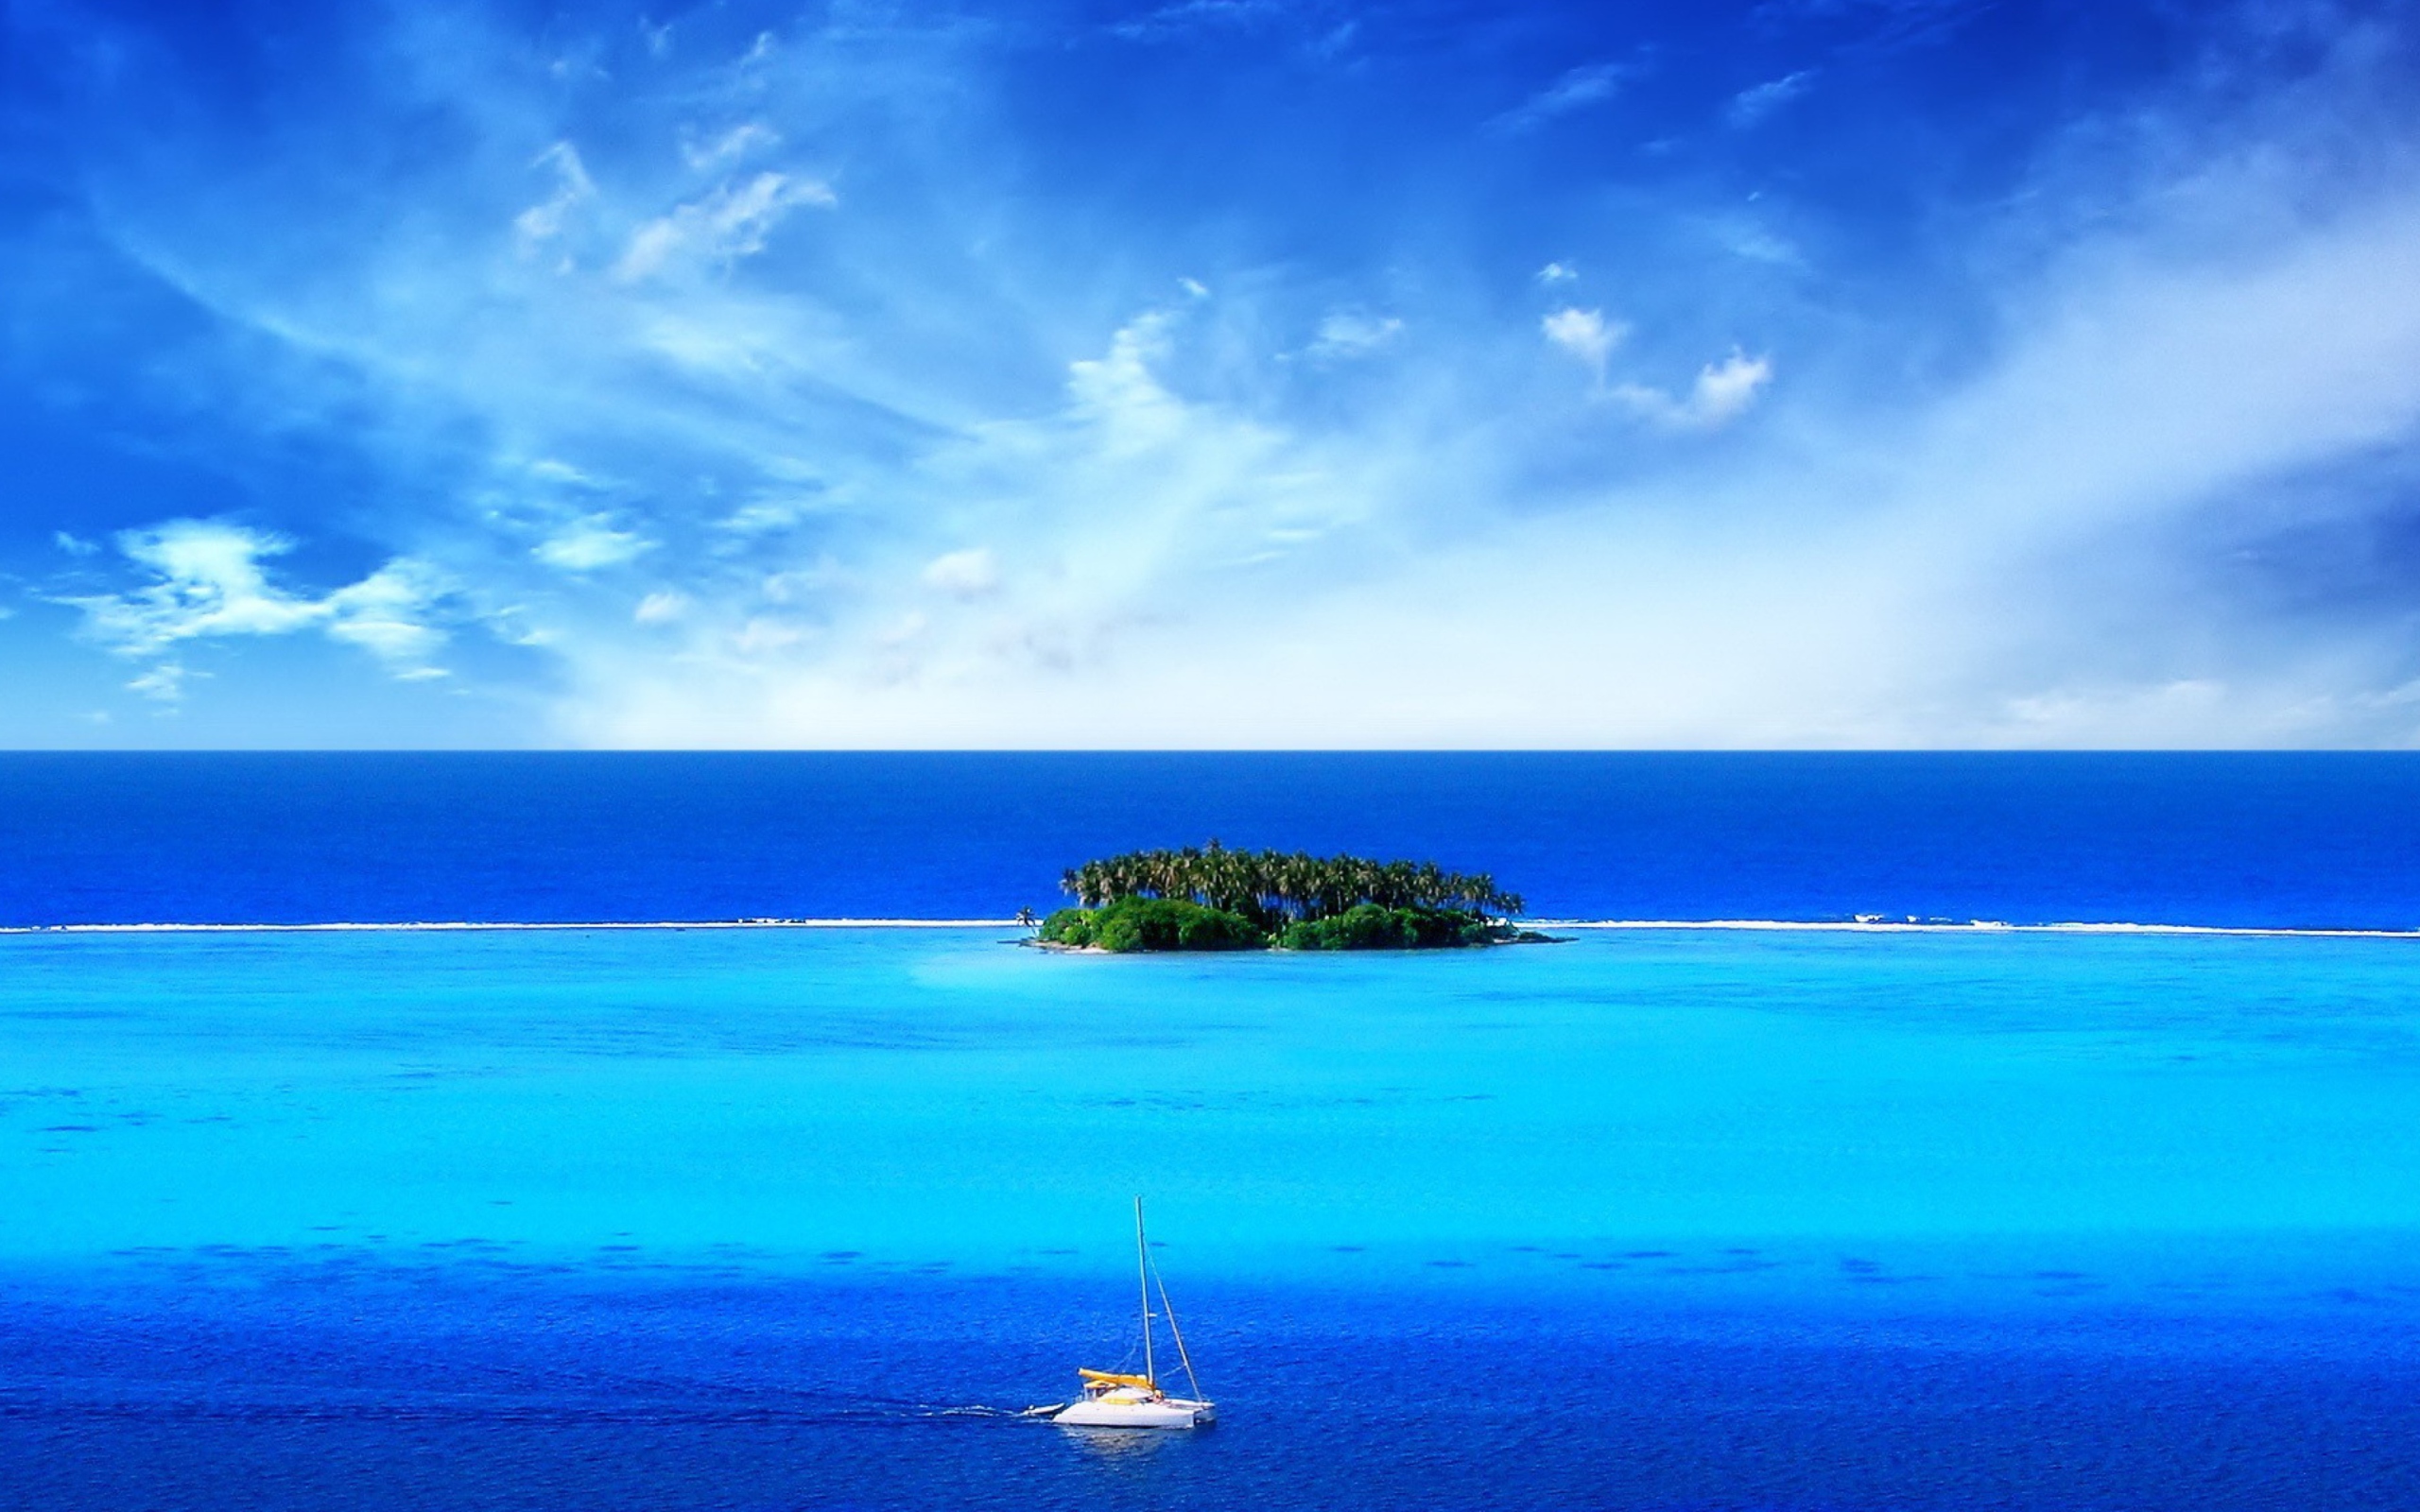 Green Island In Middle Of Blue Ocean And White Boat wallpaper 2560x1600